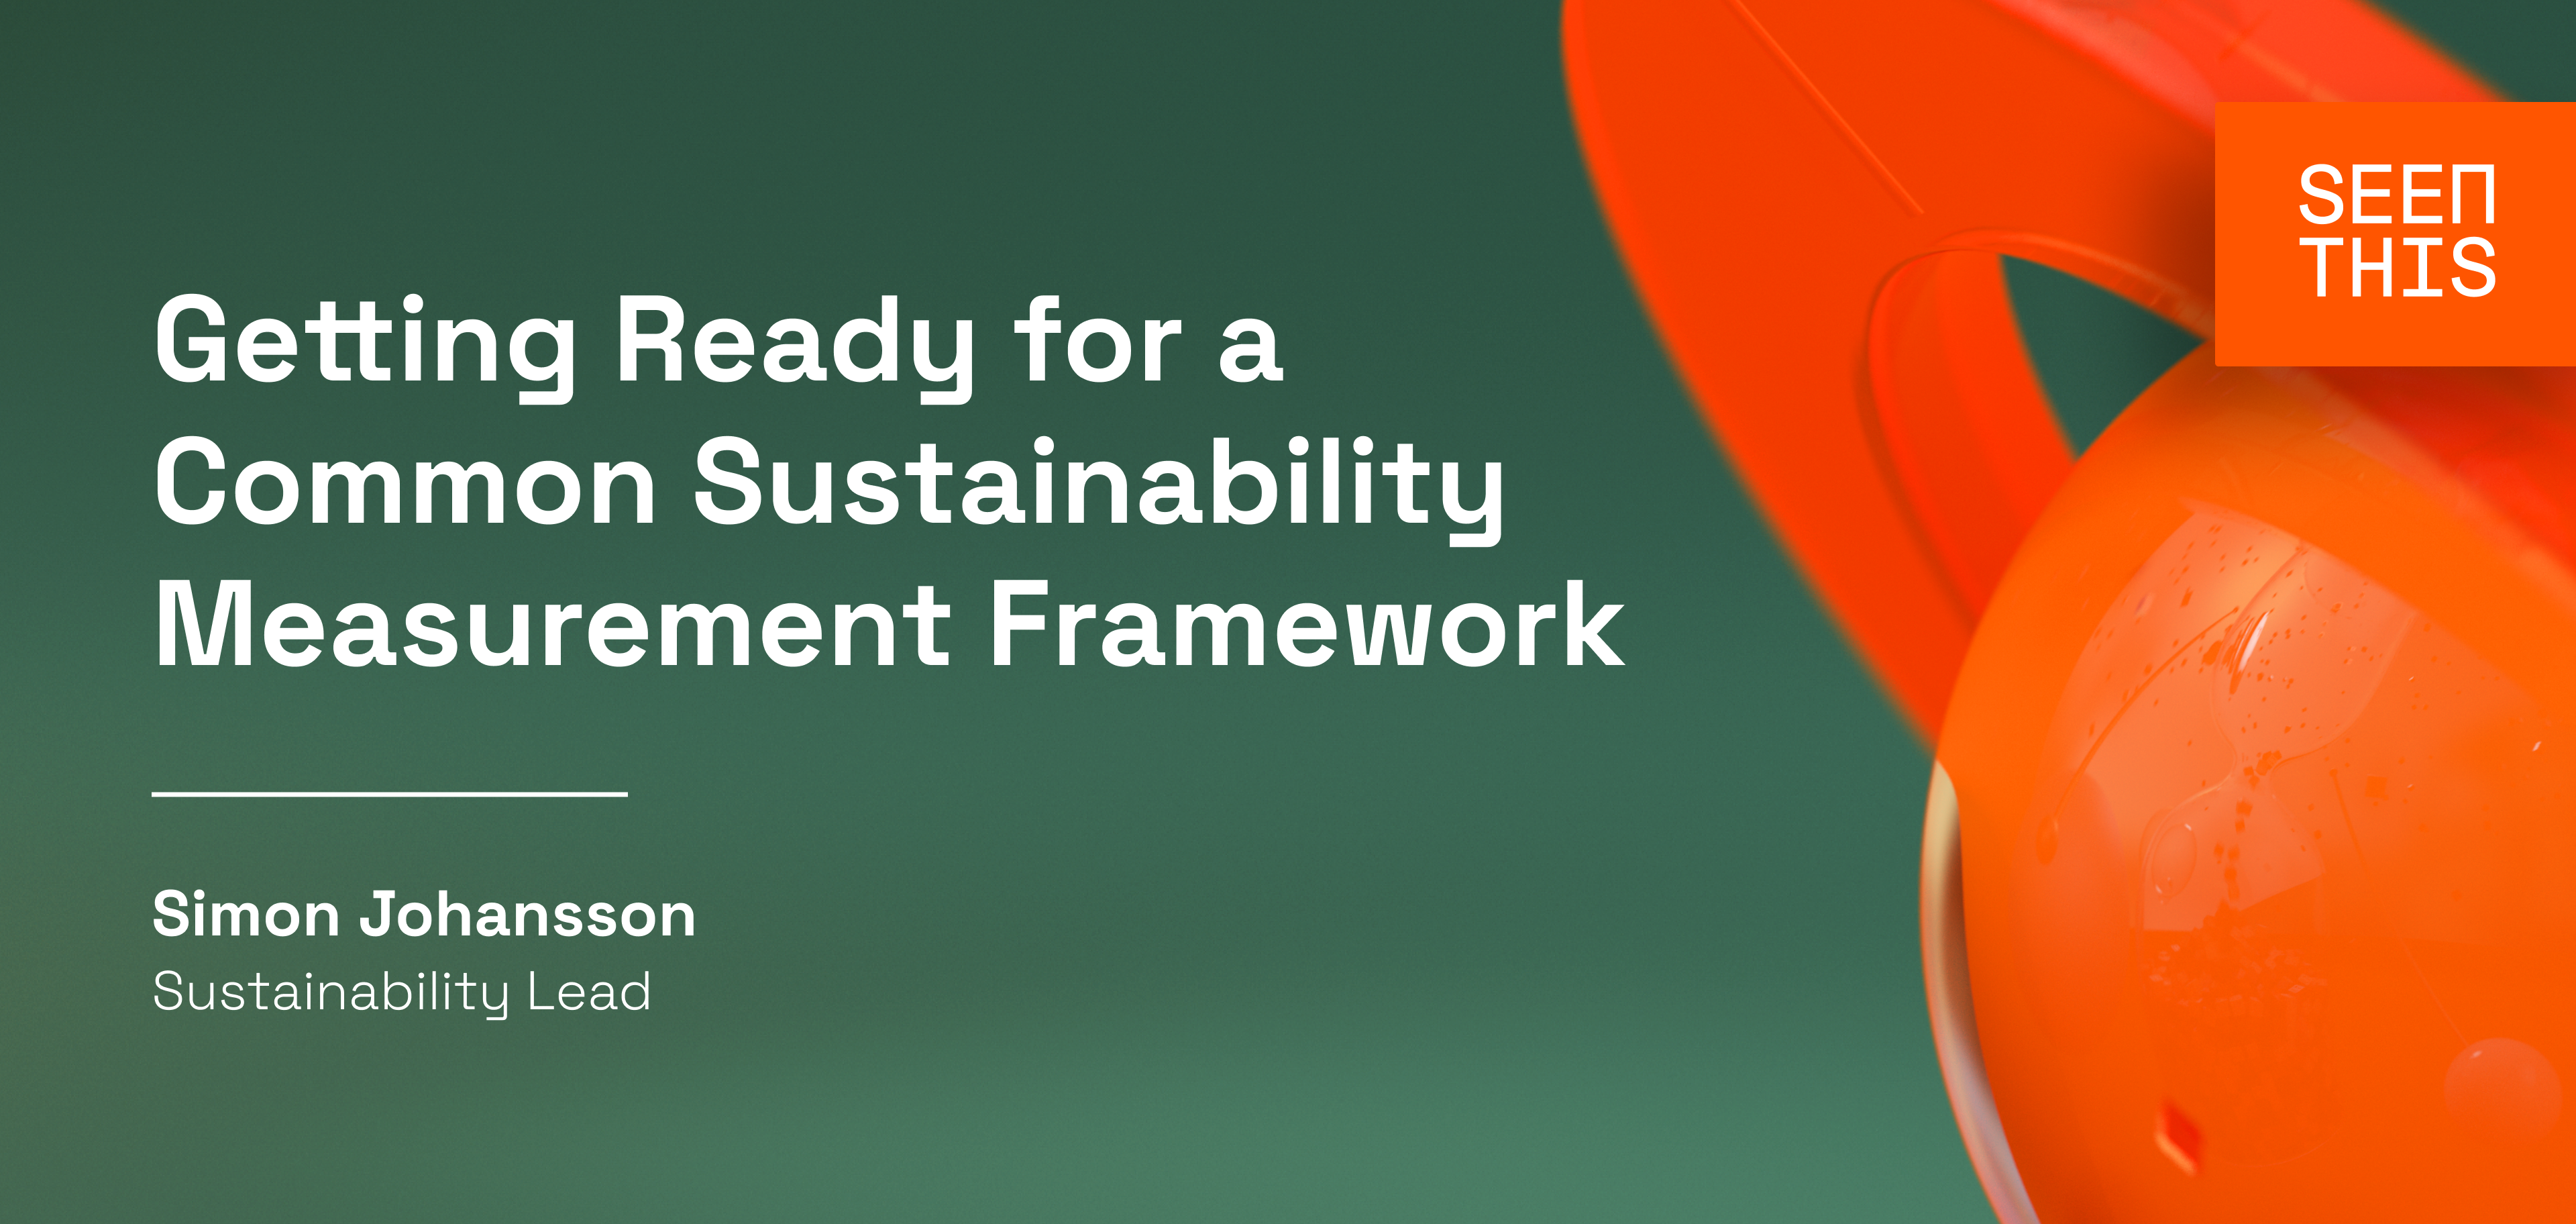 Getting Ready for a Common Sustainability Measurement Framework